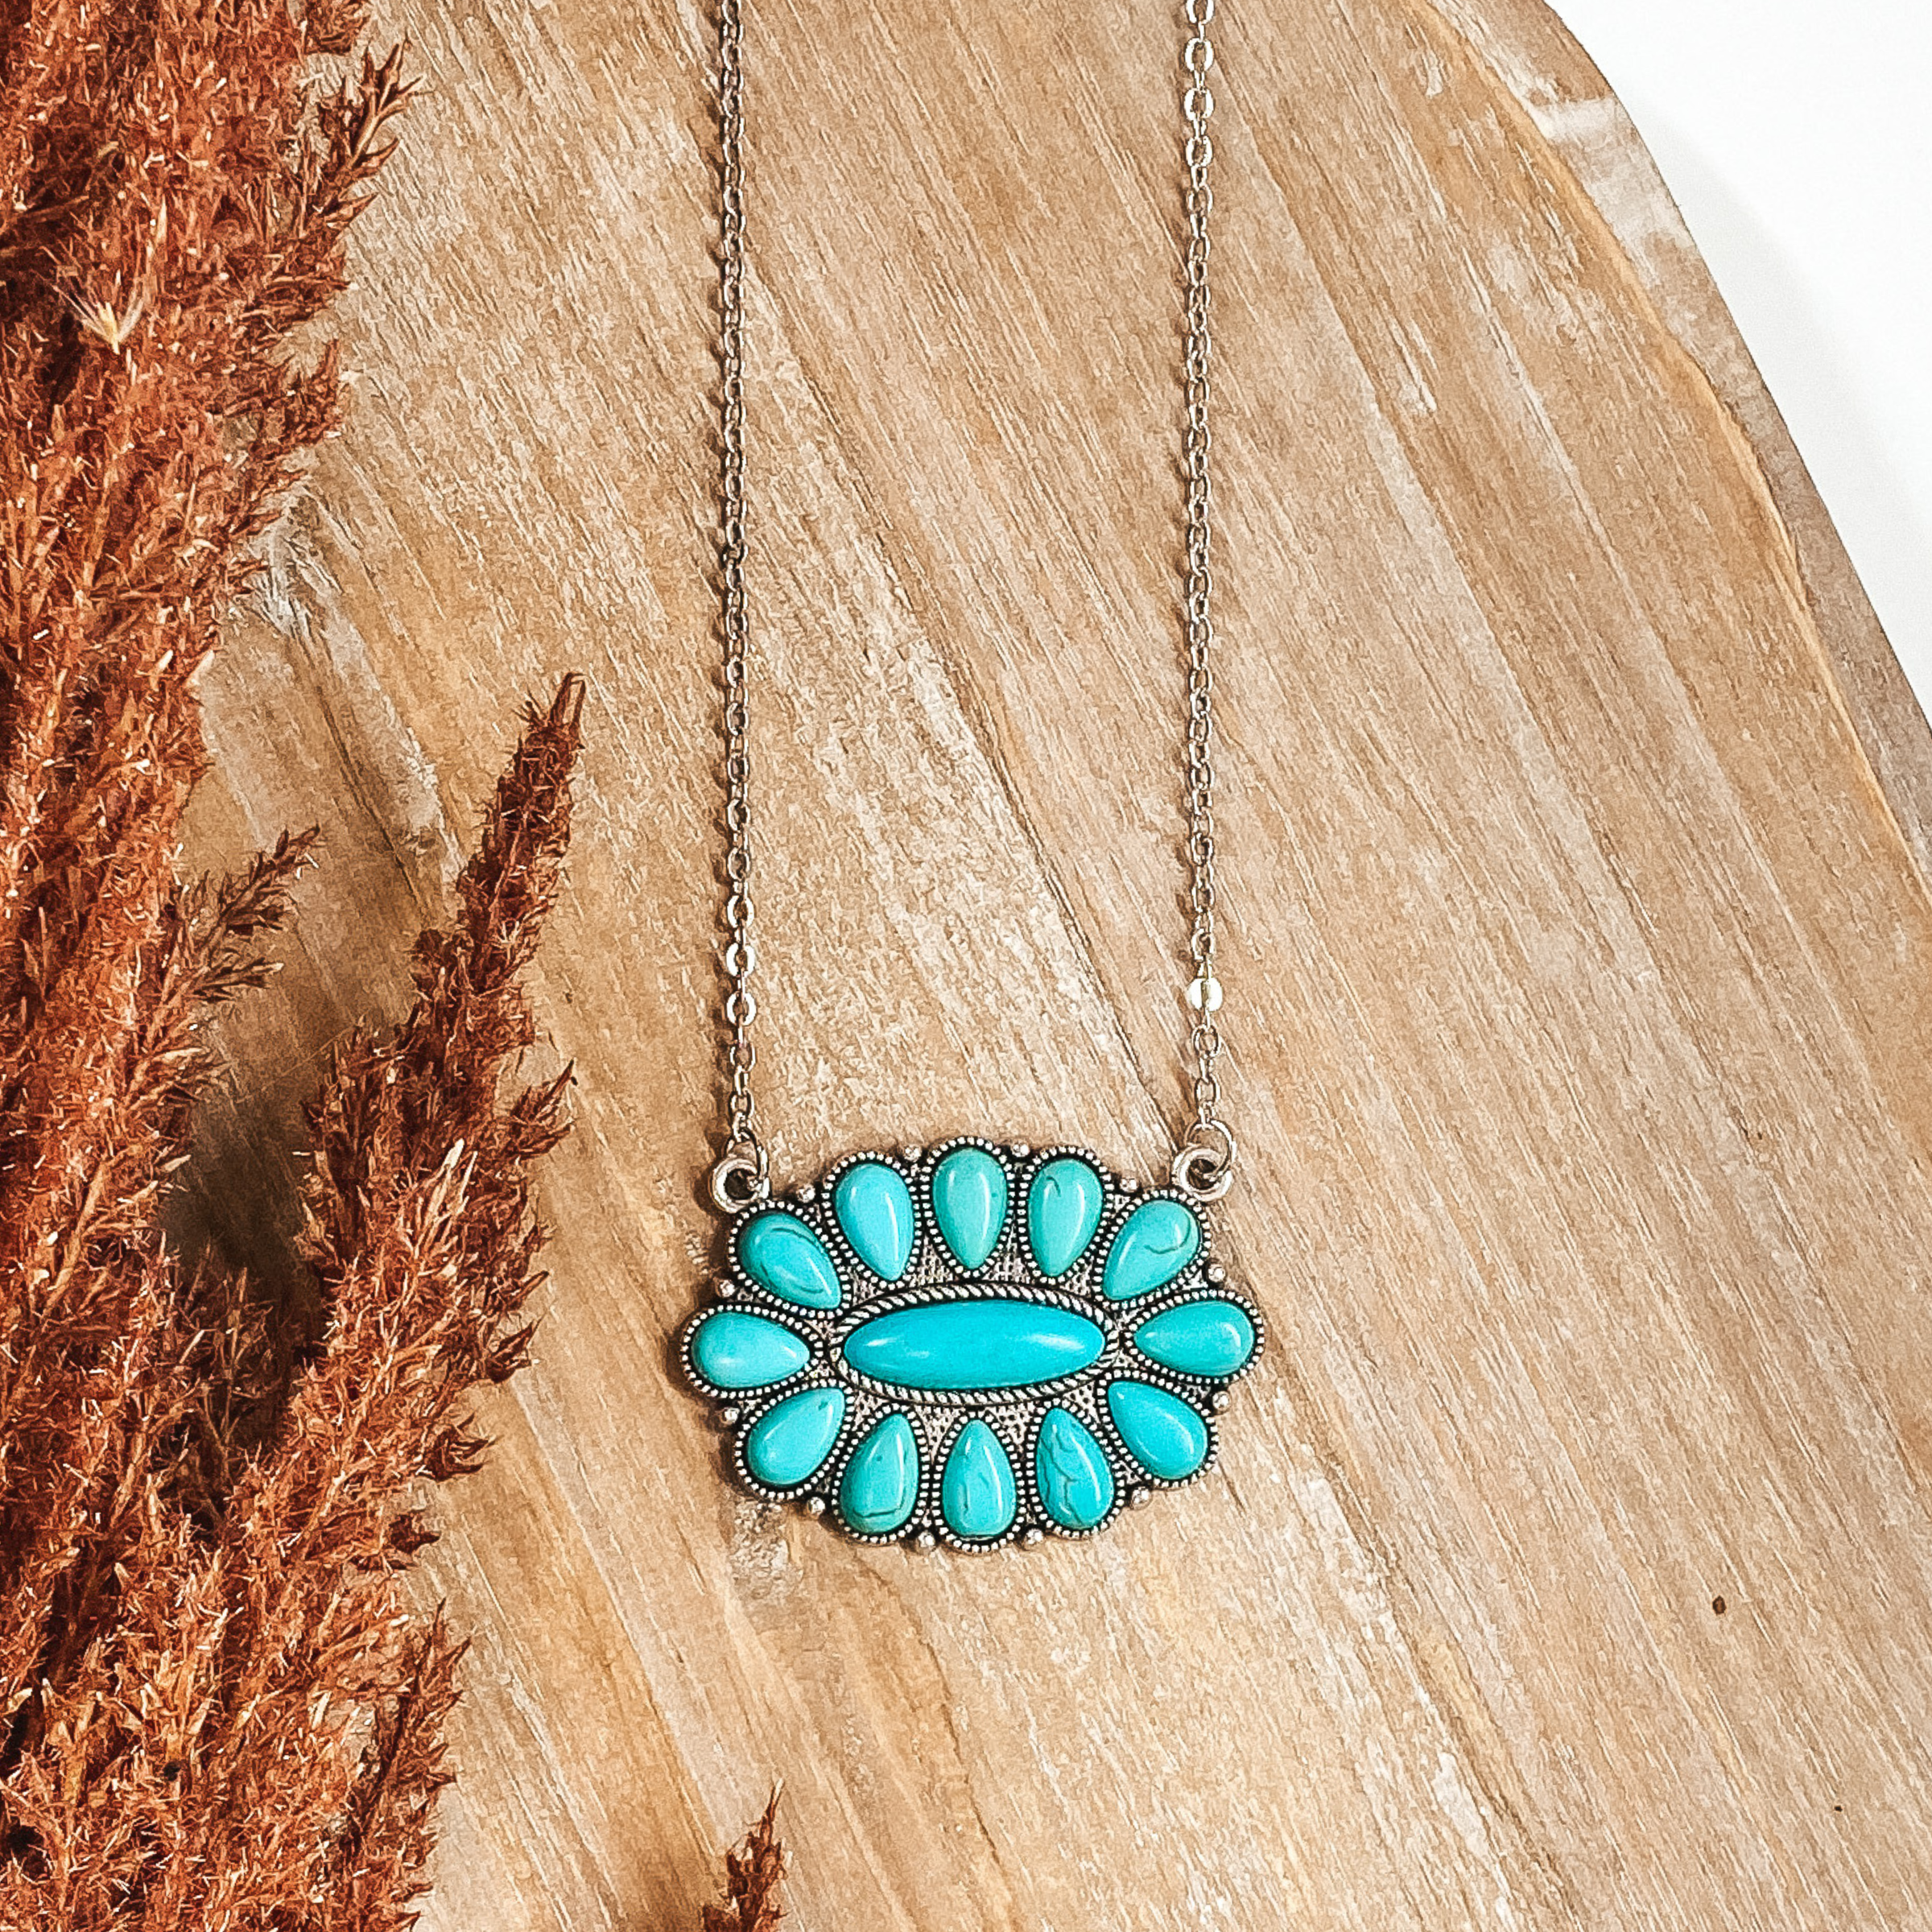 Silver chain necklace with a oval pendant with turquoise stones. This necklace is pictured on a tan background with brown pompous grass lining the left side on a white background.